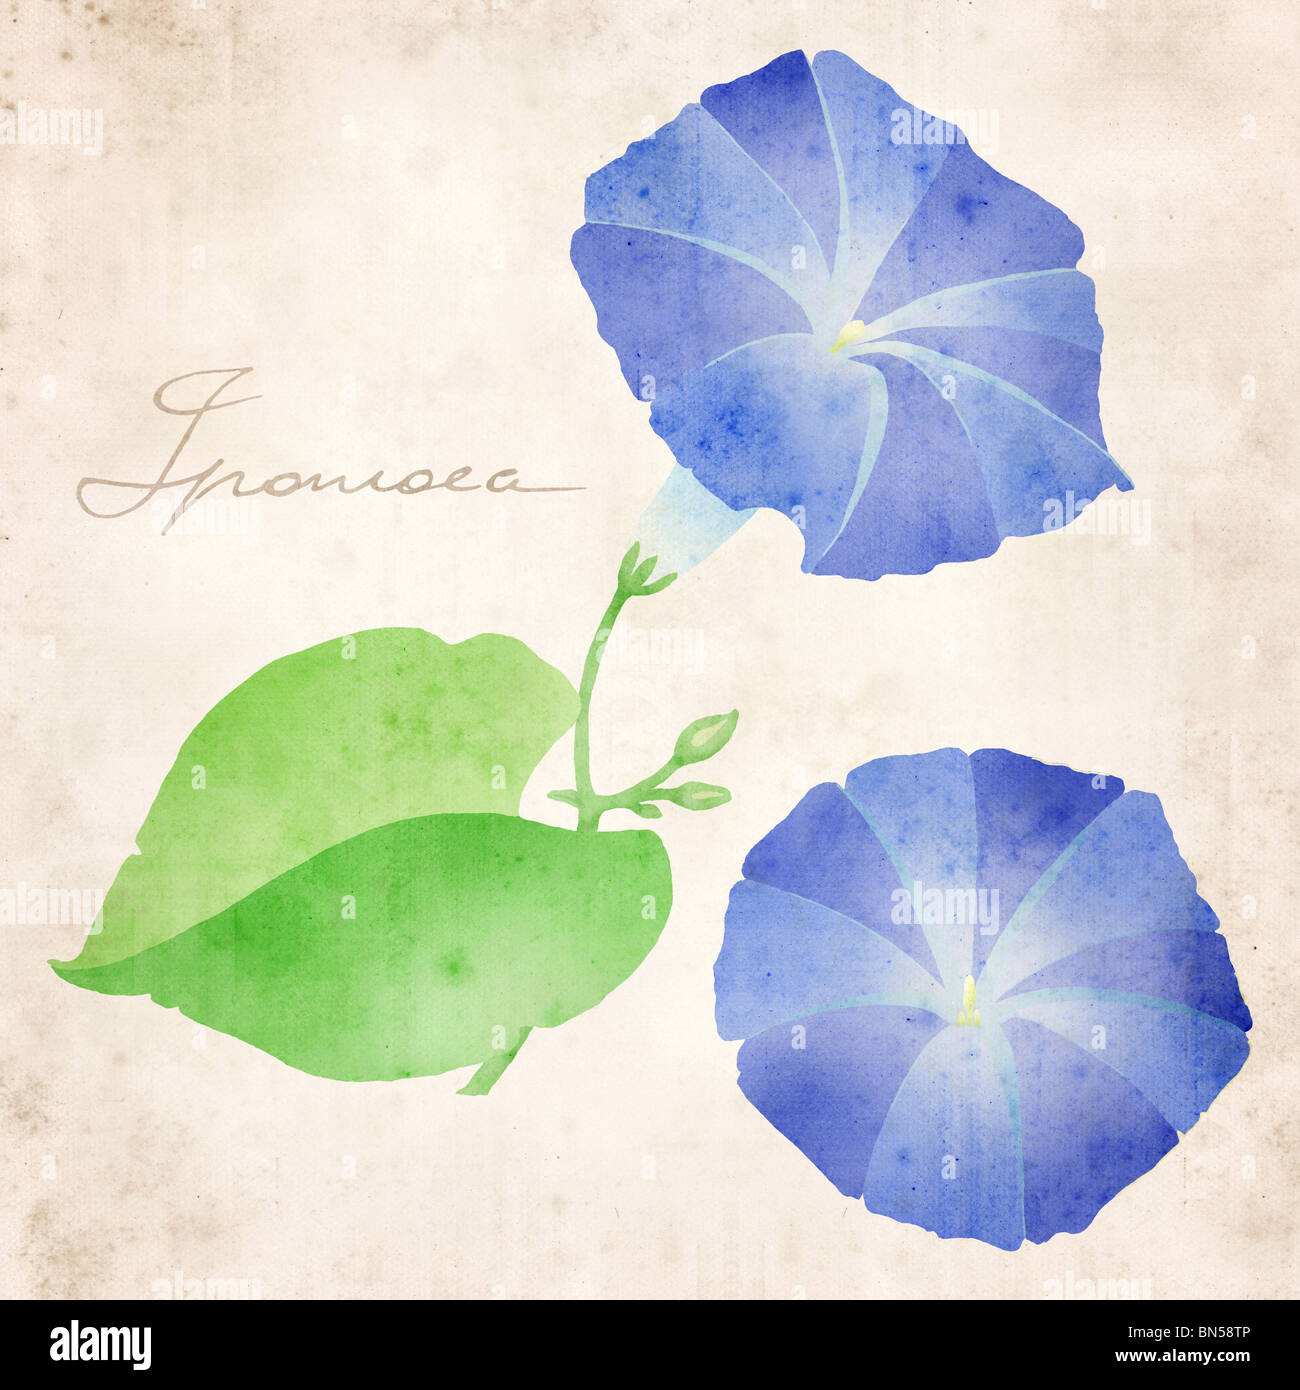 ipomoea  collage in  botanical illustration style, on old paper background, signed 'Ipoemea' Stock Photo